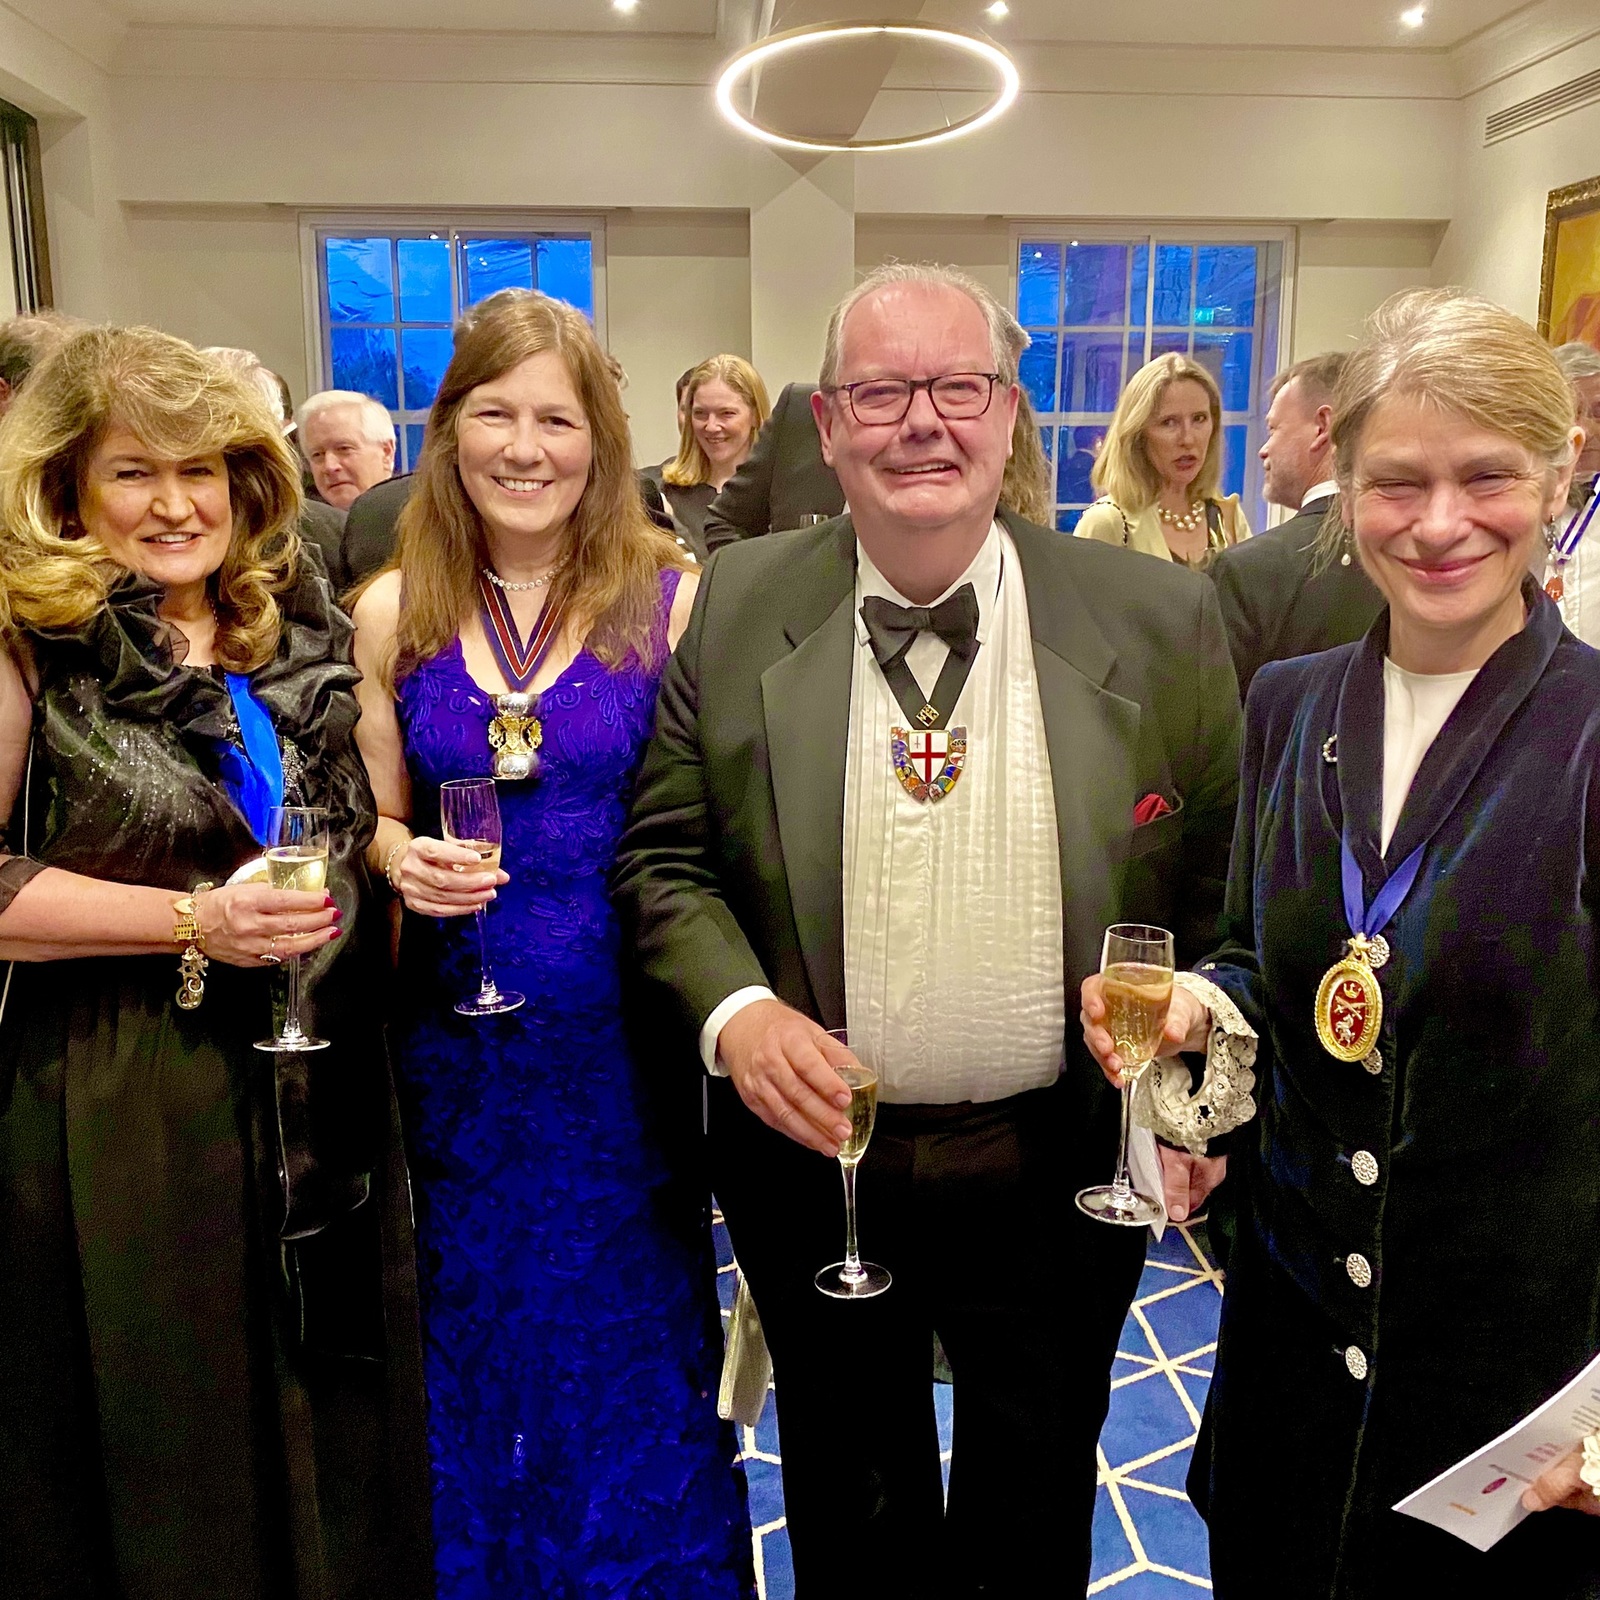 With Master Chartered Secretary Julie Fox, Master Actuary Julie Griffiths, and Mrs Lynn Cooper DL, High Sheriff of Greater London at the Investment Manager’s Civic Dinner